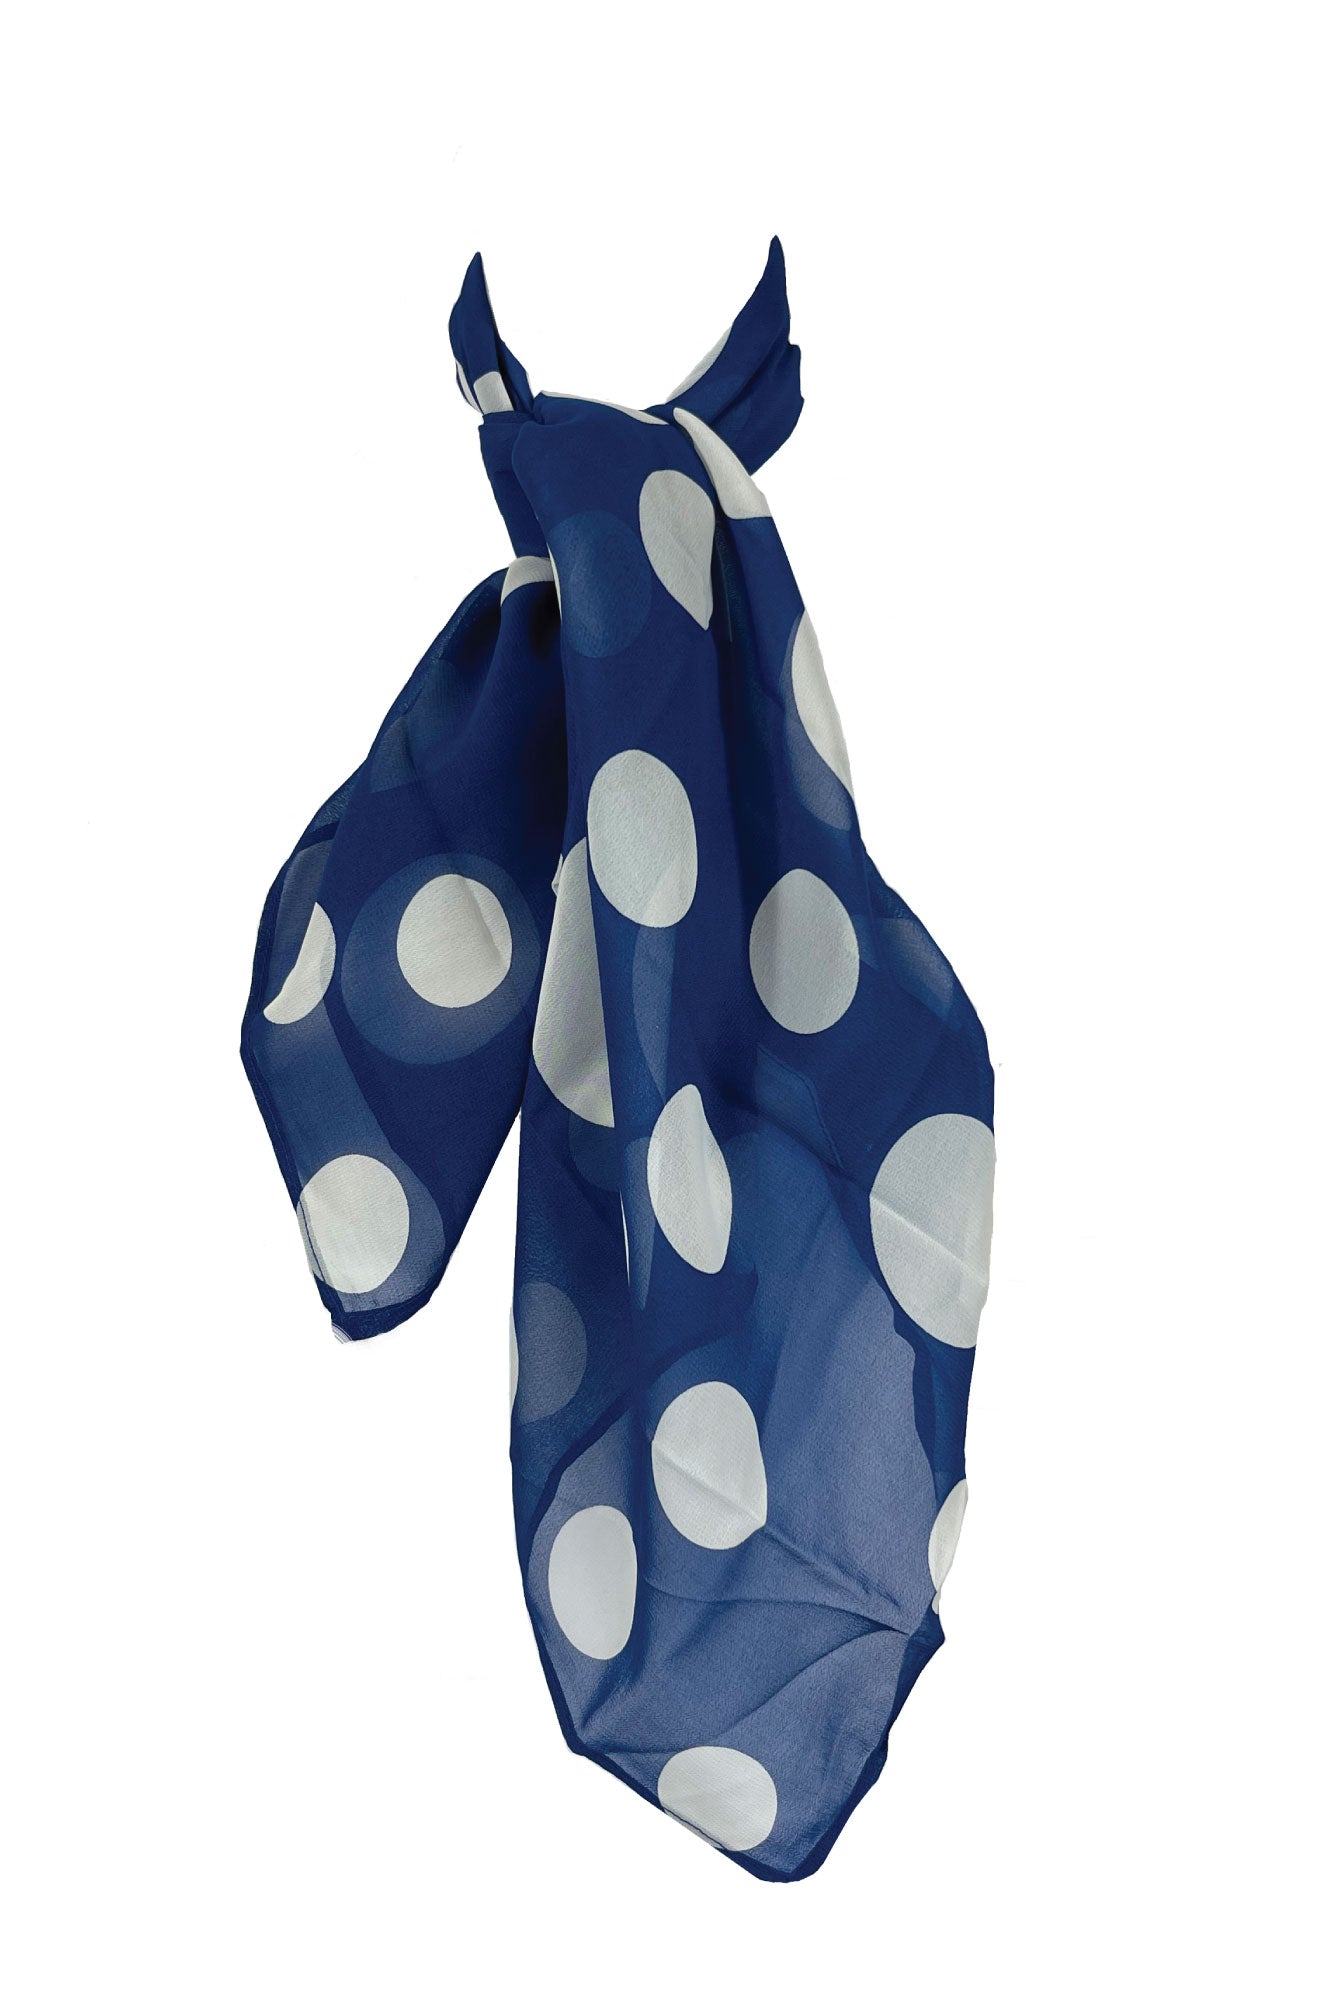 Blue Scarf With Big White Polka-Dots